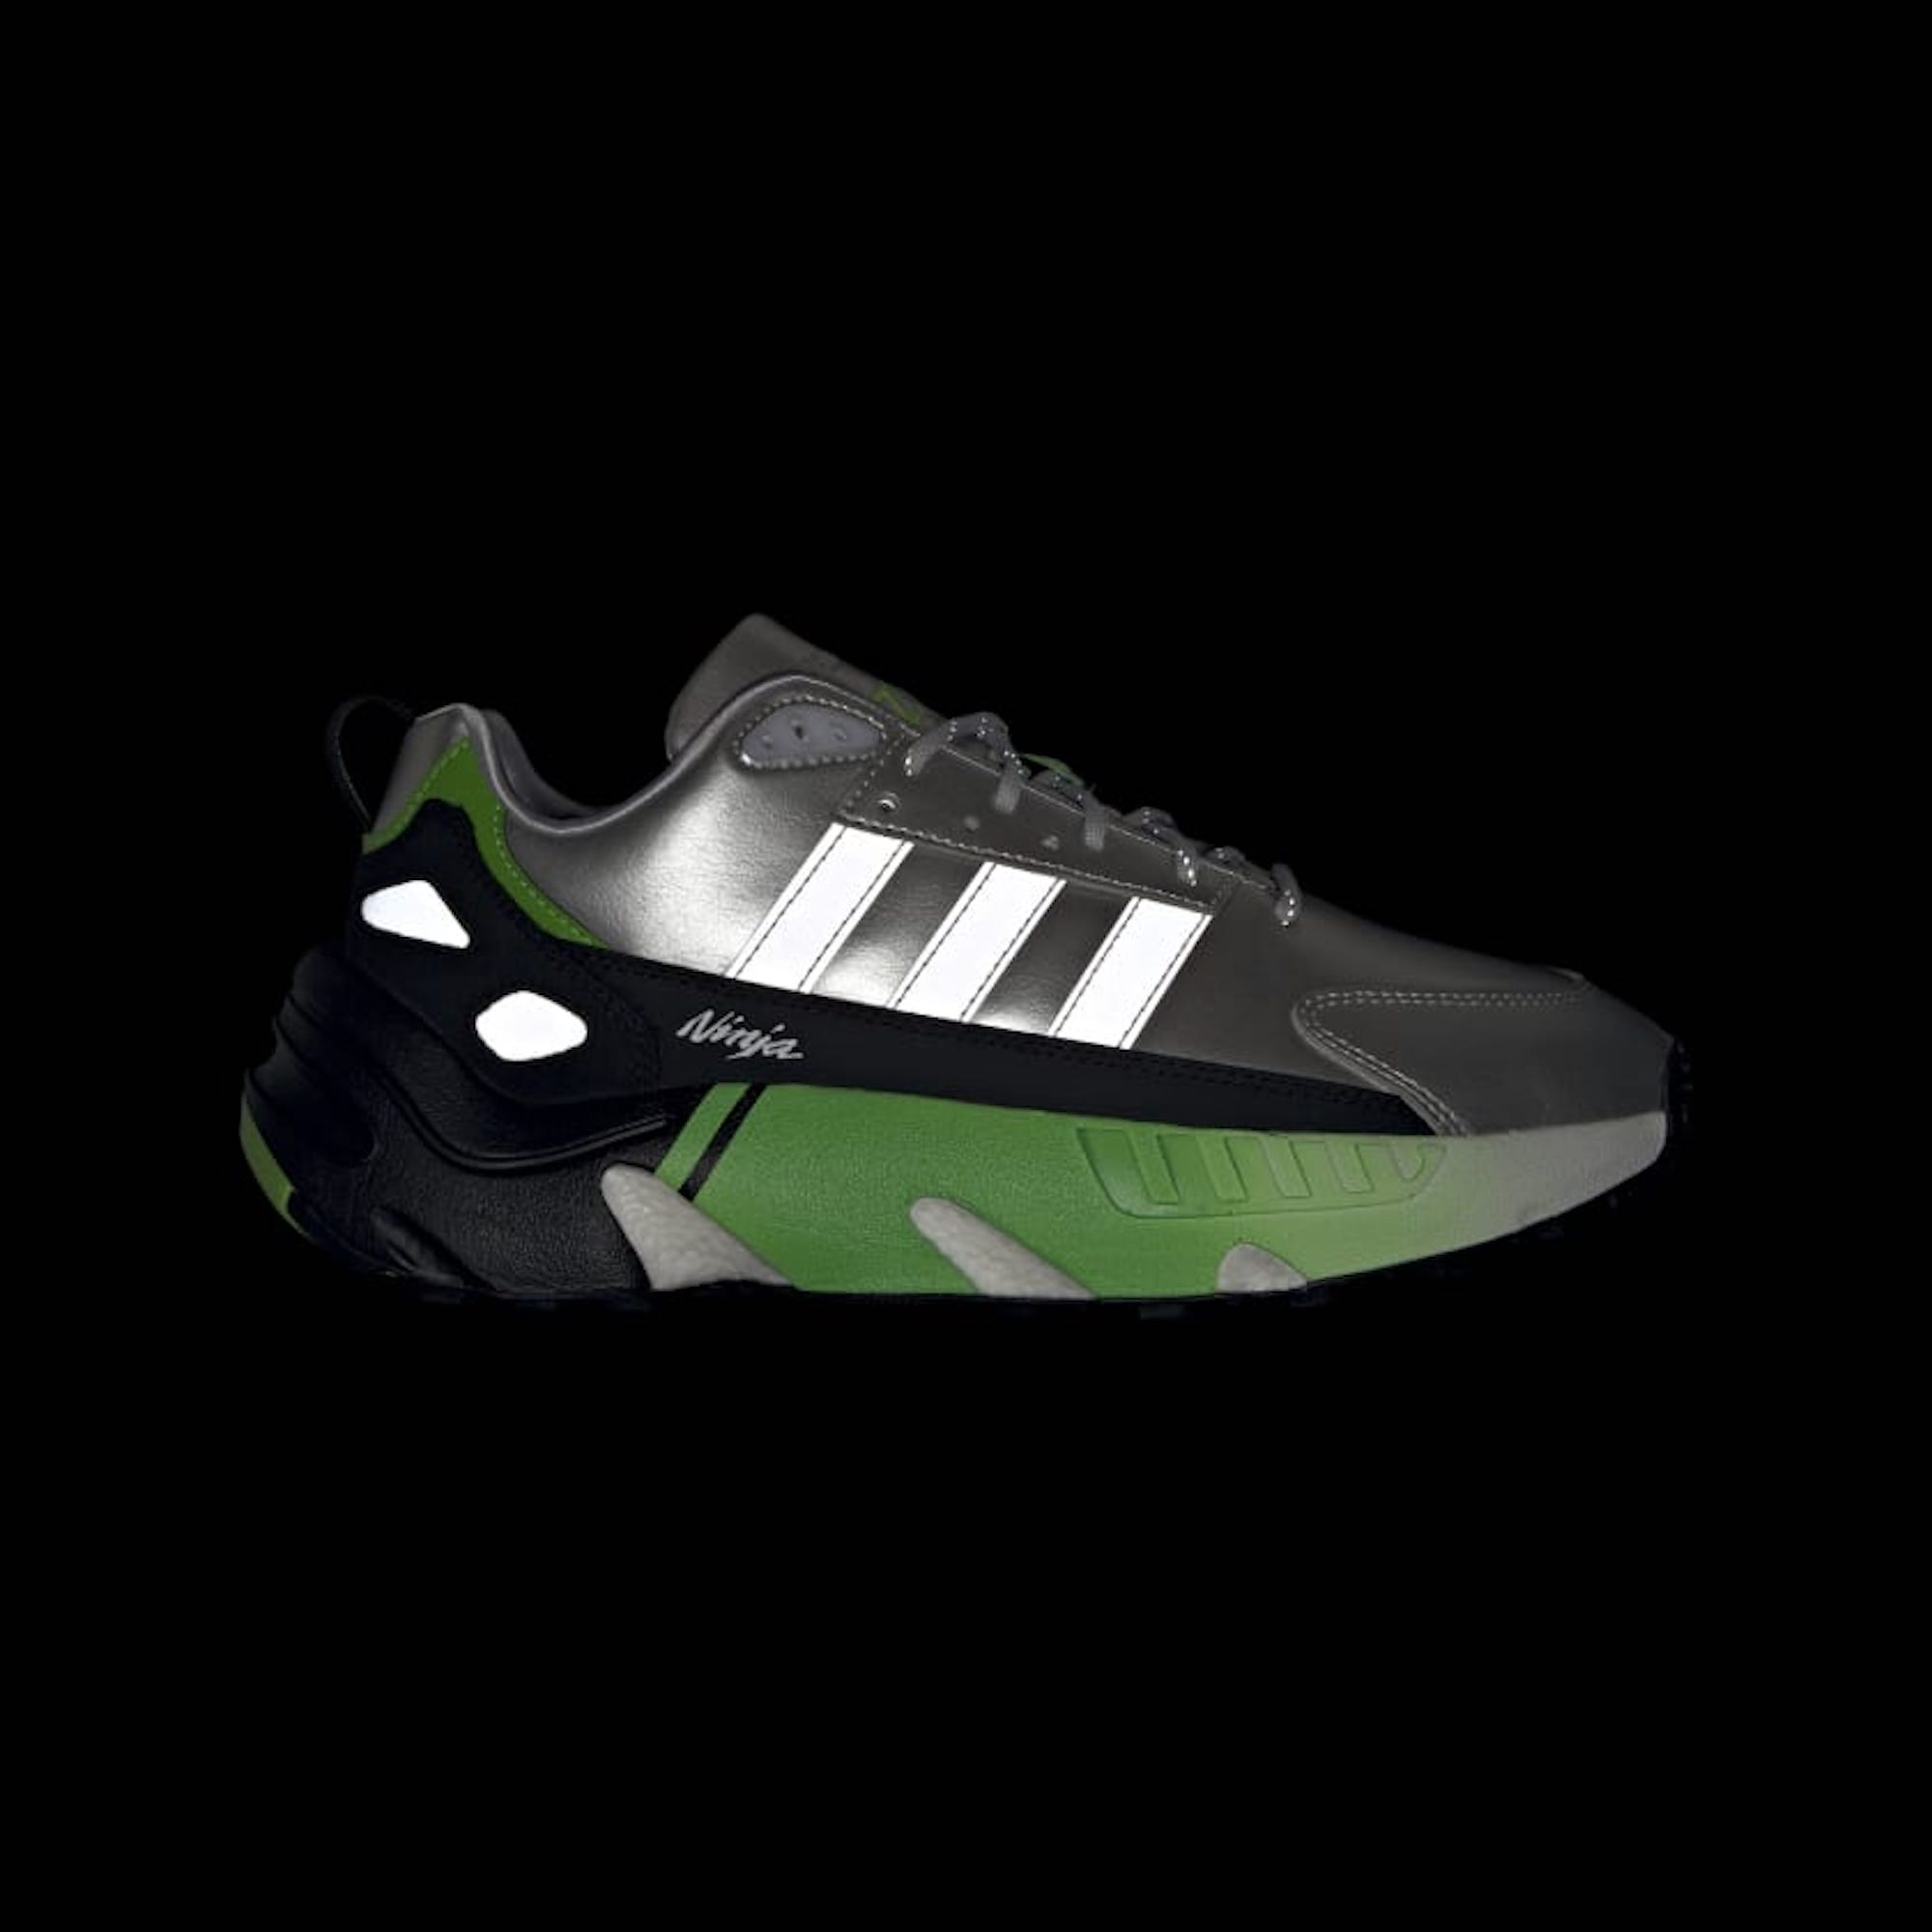 Kawasaki's ZX22, created in partnership with Adidas. Media sourced from Adidas's website.